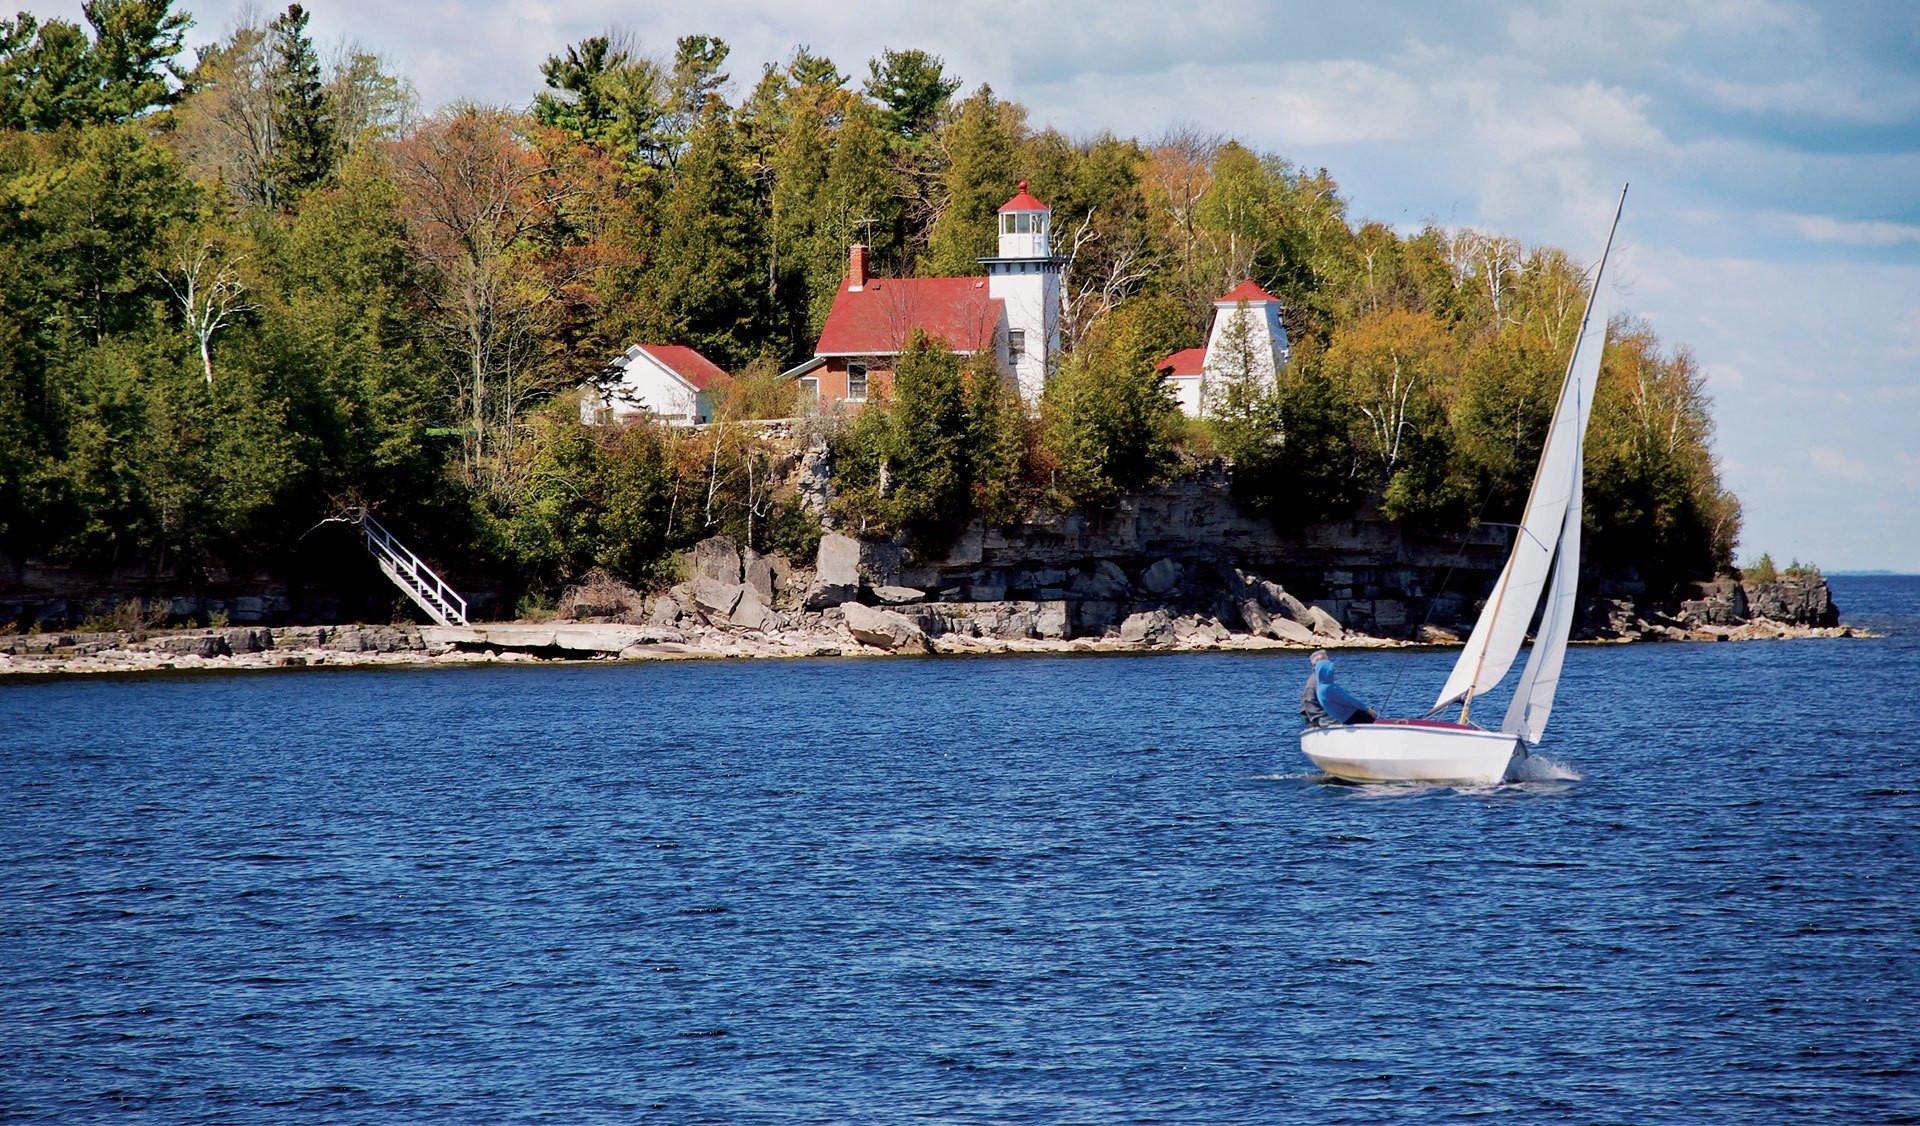 Sailboat in front of lighthouse in the trees